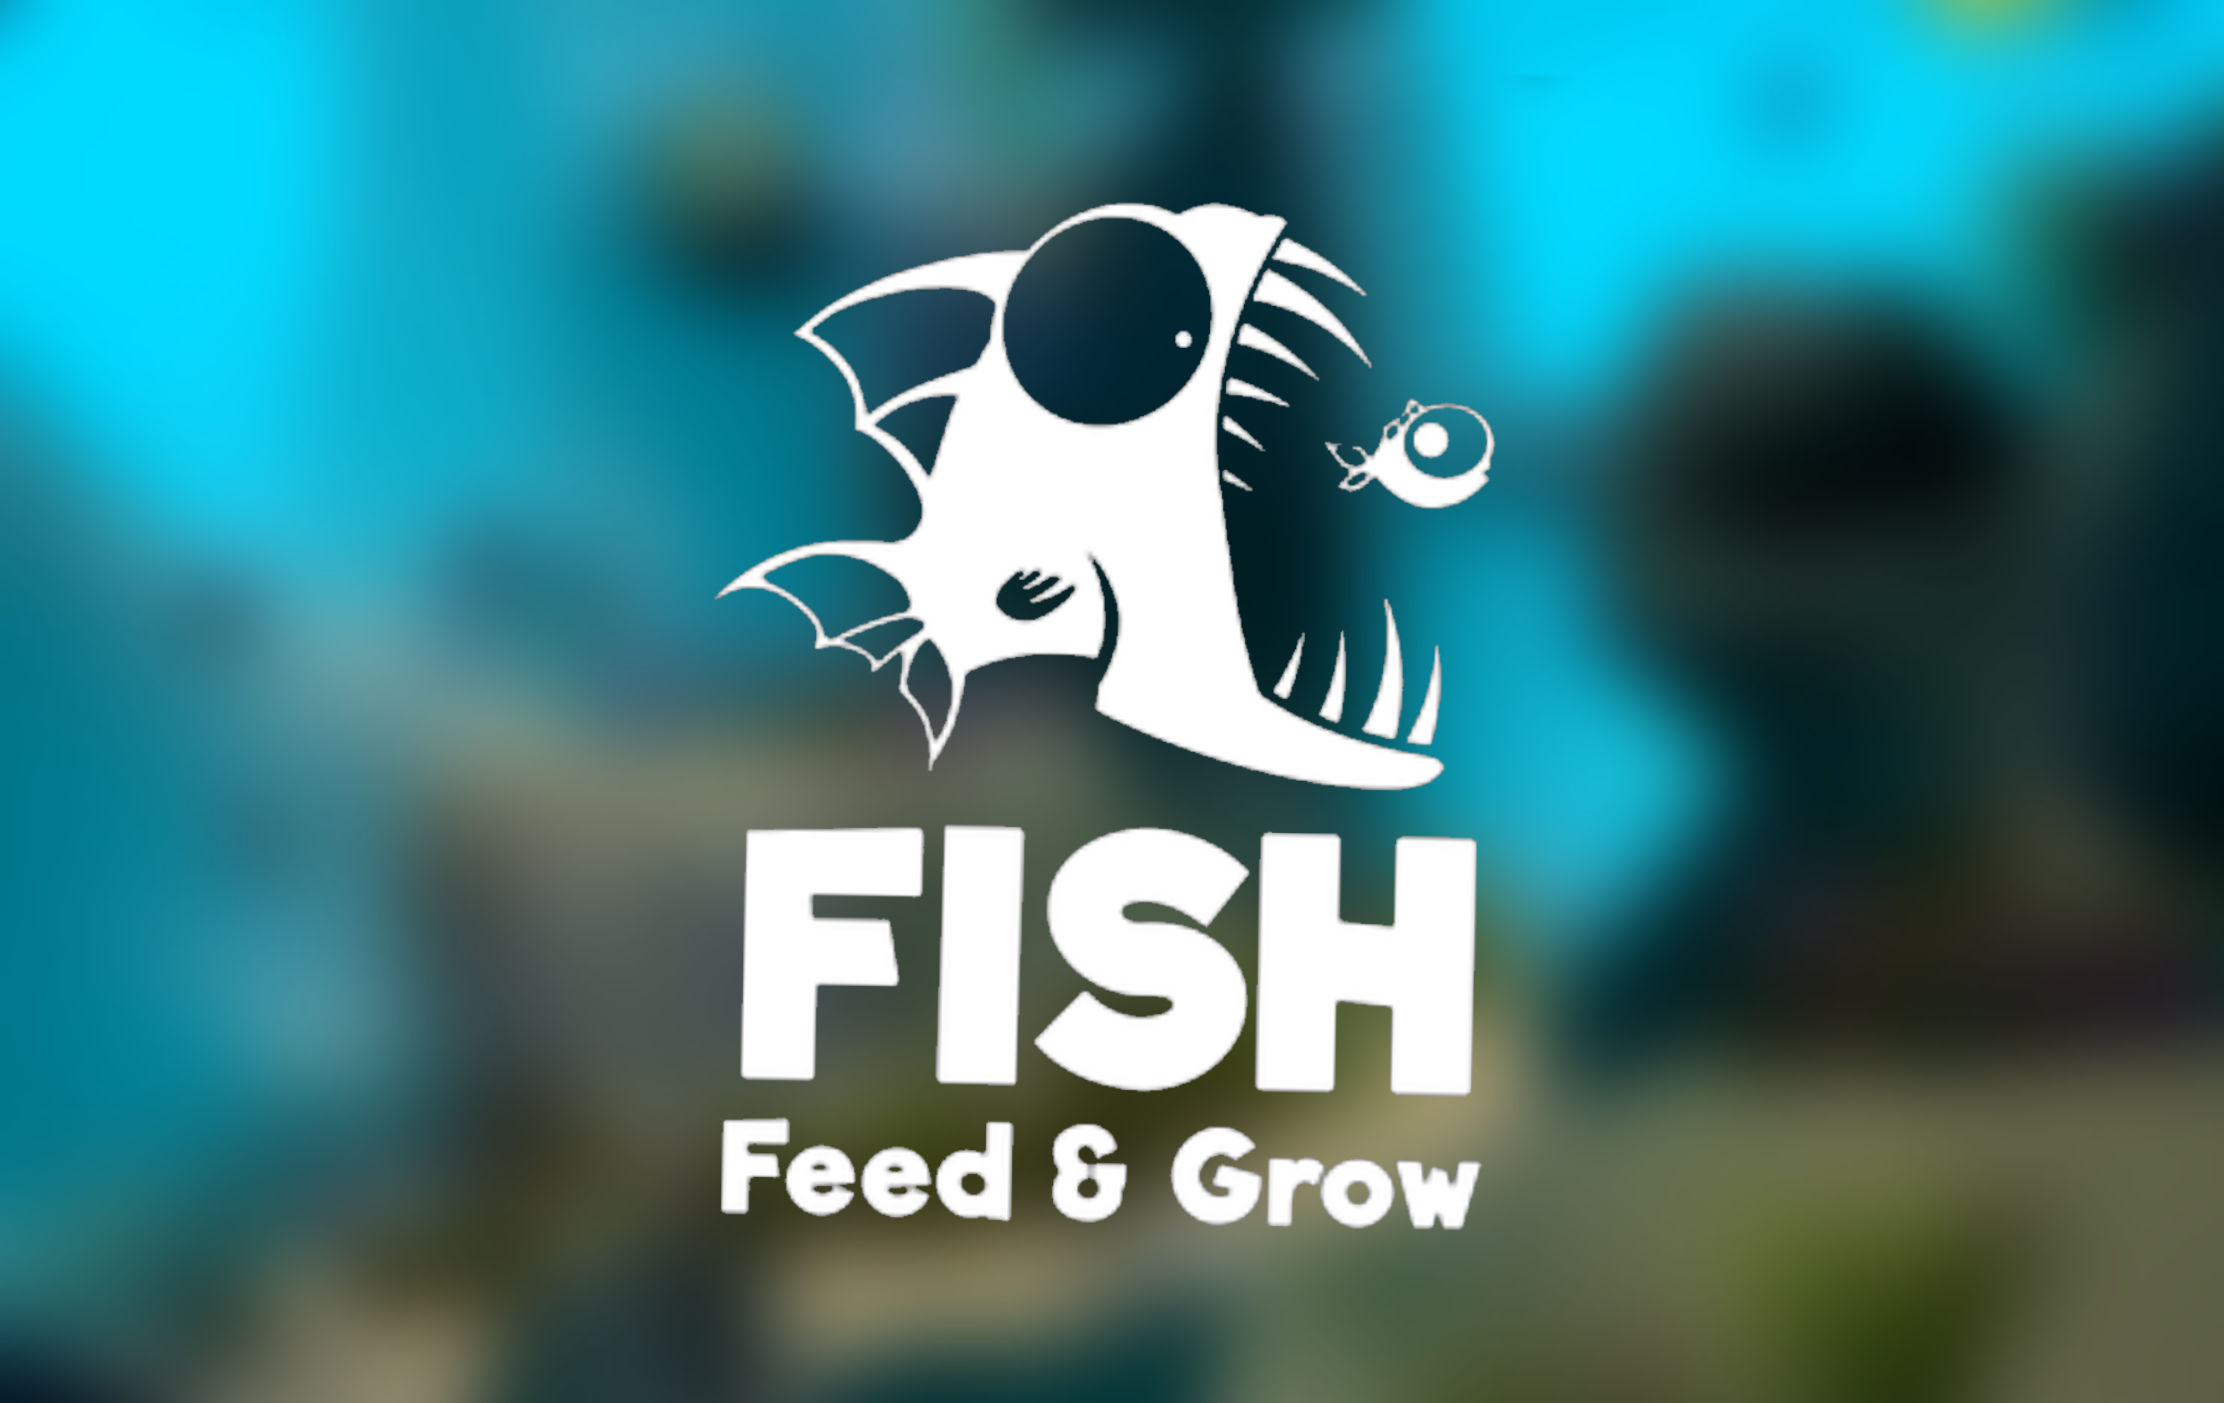 Steam Community :: Video :: How to get Bloop in Feed and Grow: Fish